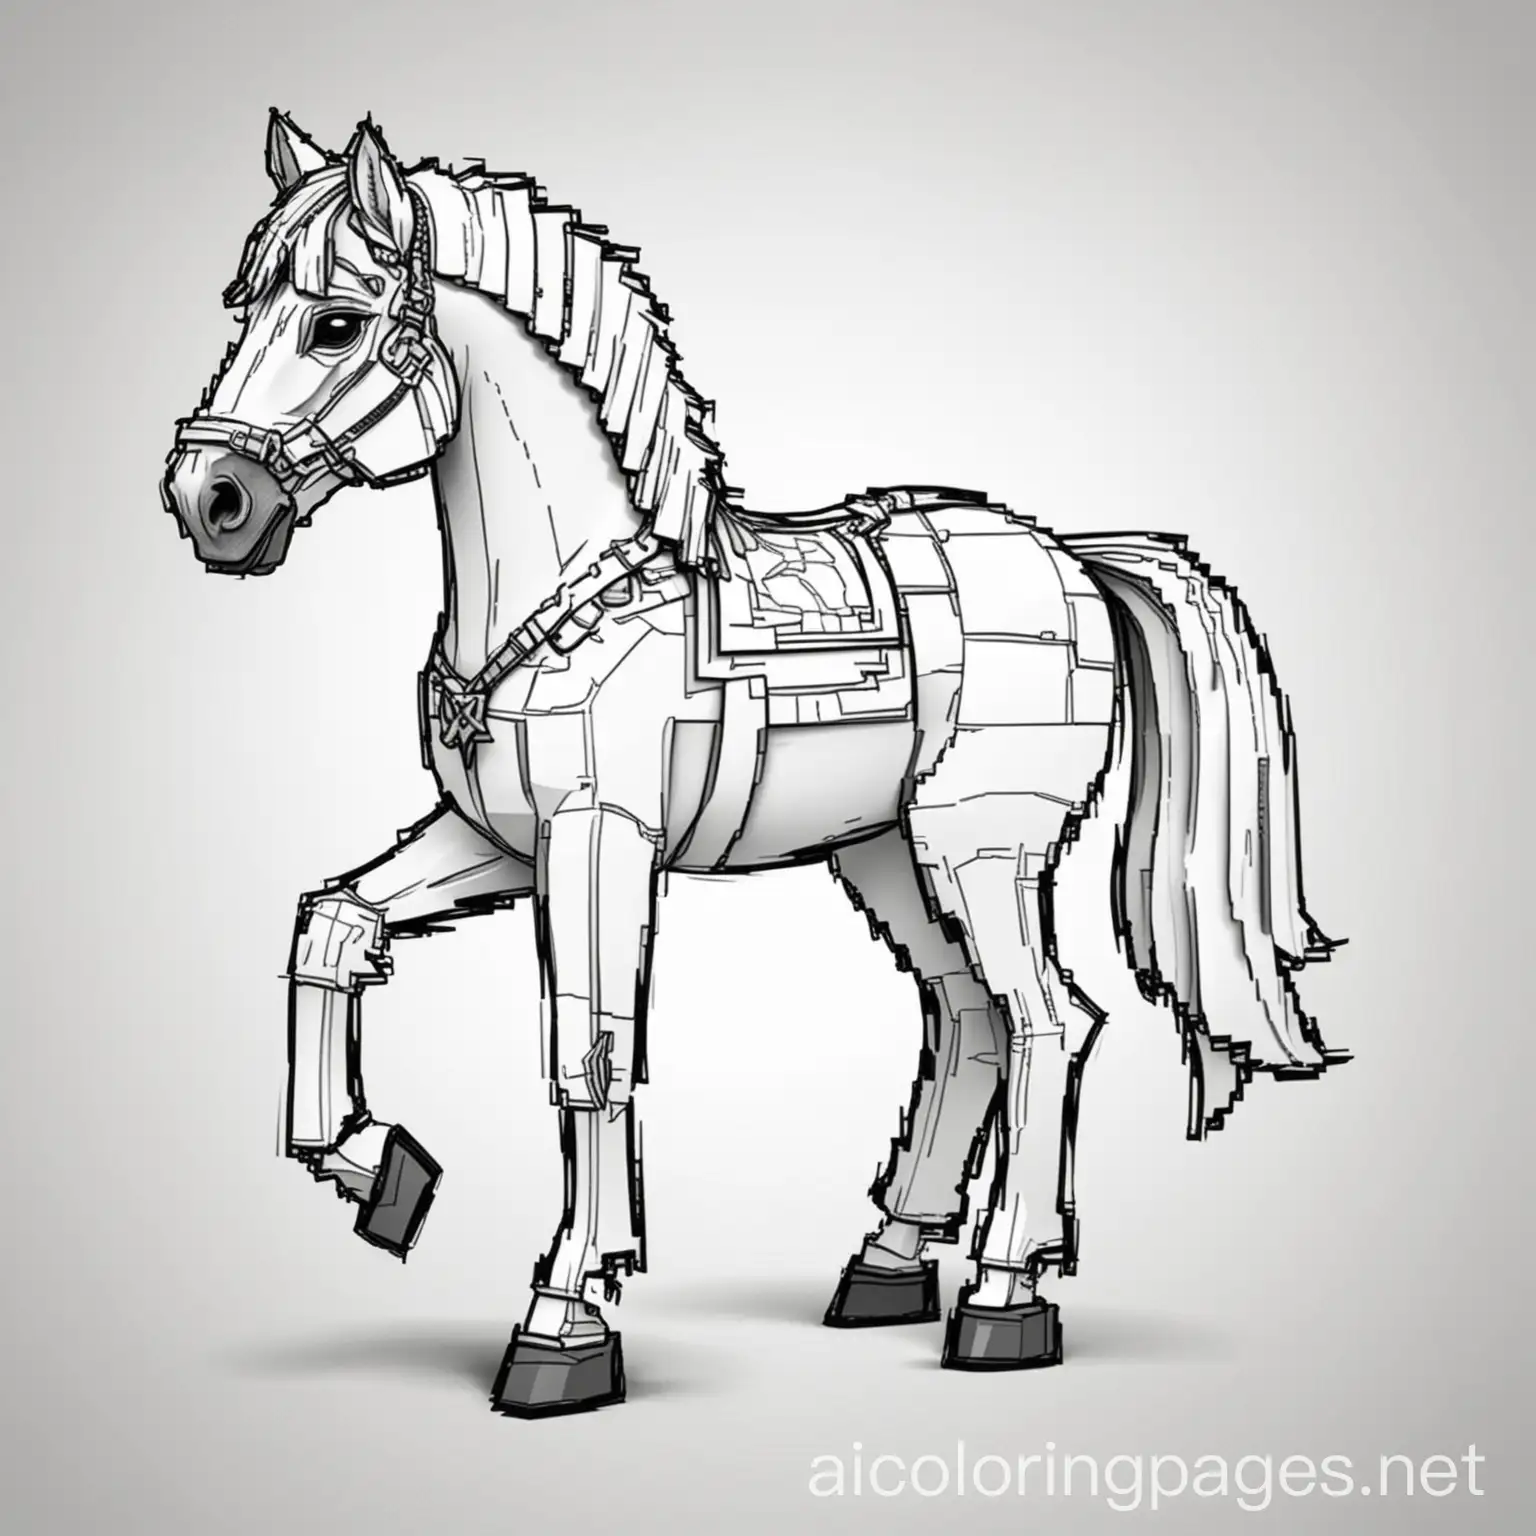 Minecraft-Horse-Coloring-Page-for-Kids-Black-and-White-Line-Art